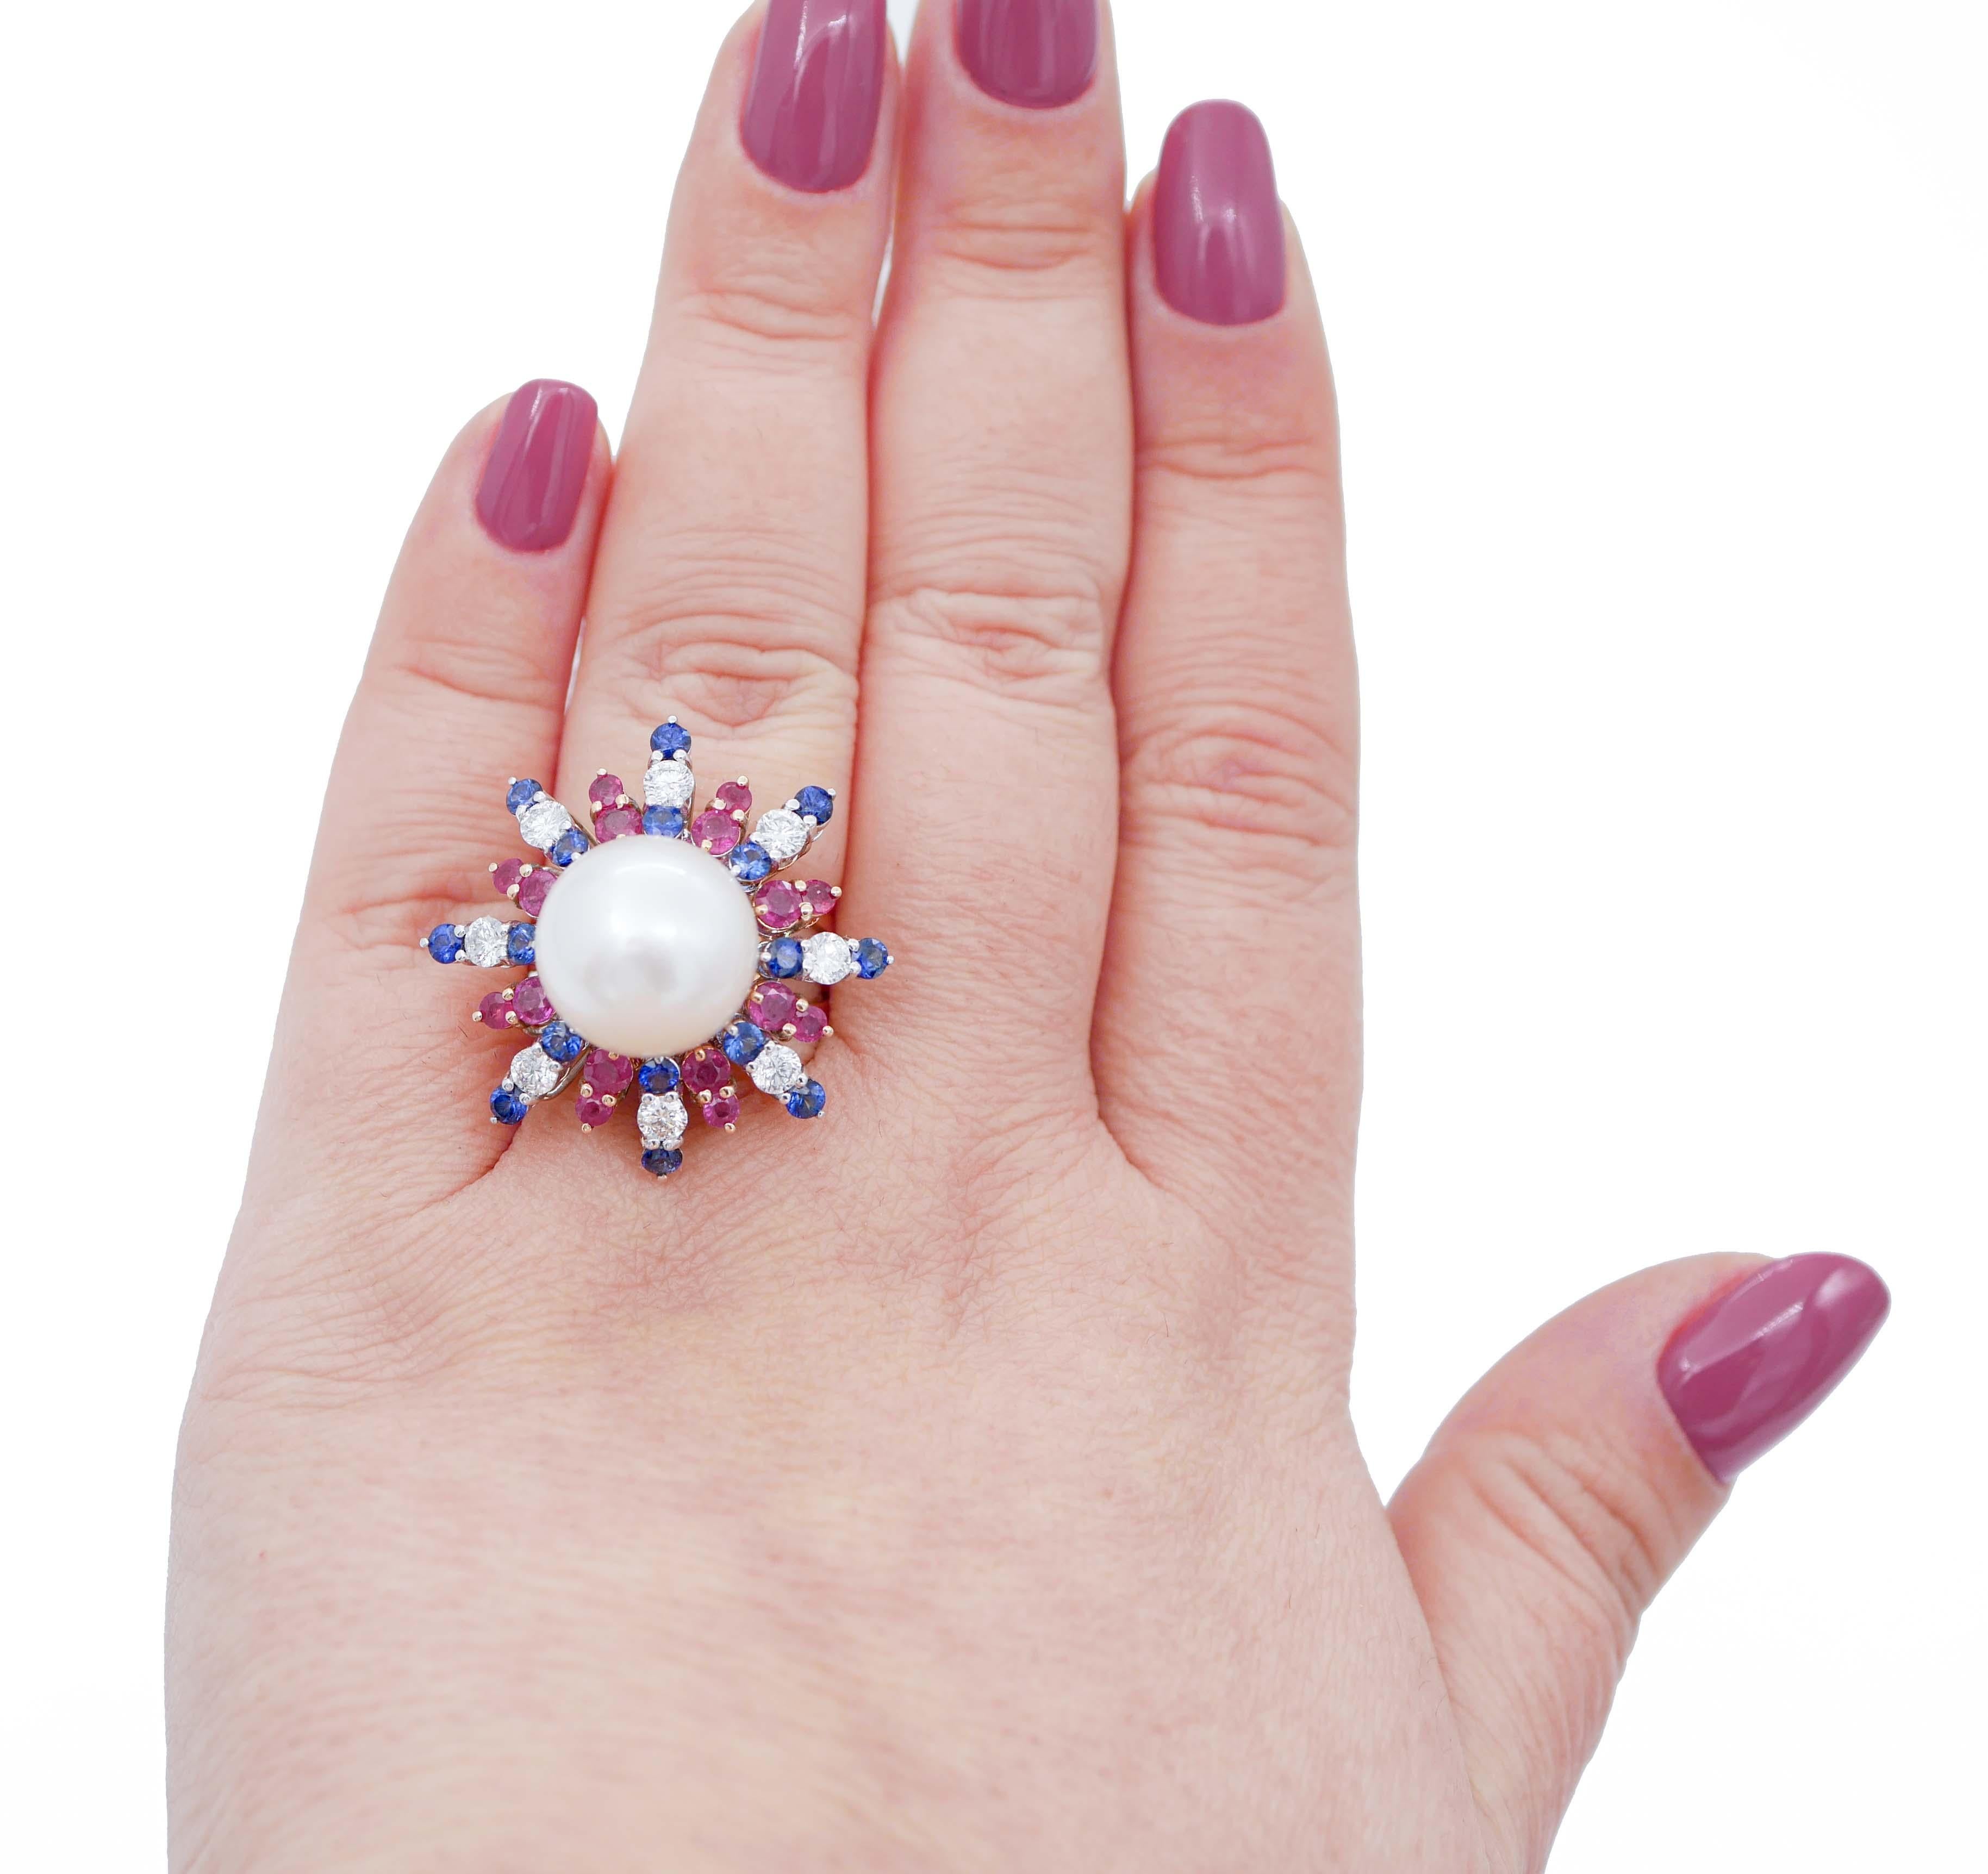 Mixed Cut South-Sea Pearl, Rubies, Sapphires, Diamonds, 14 Karat Rose and White Gold Ring For Sale